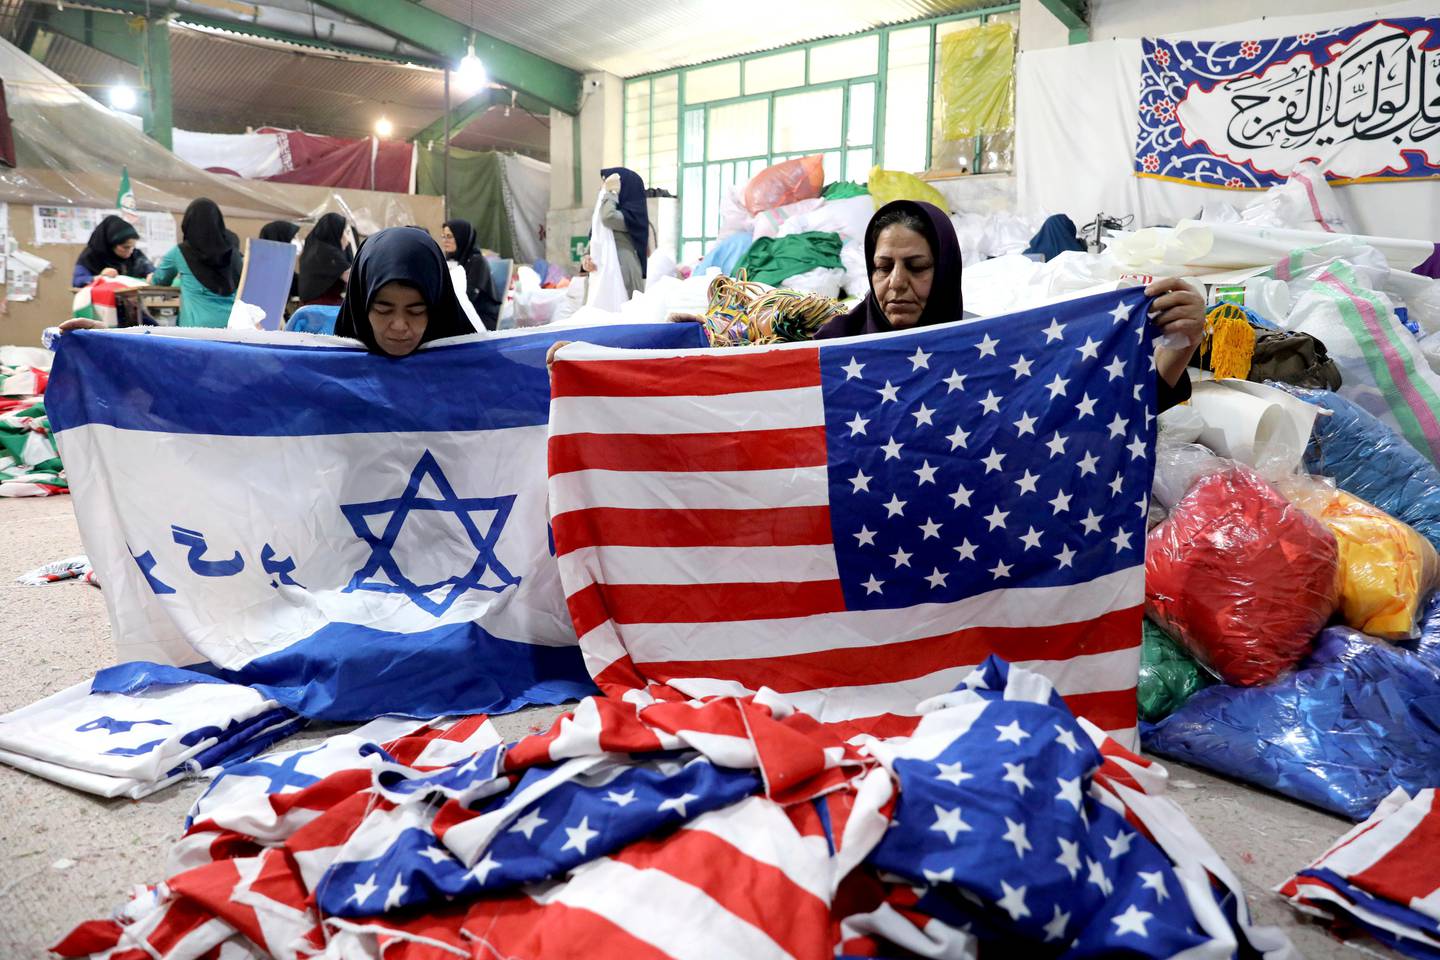 In this Saturday, Feb. 8, 2020 photo, workers fold U.S. flags and Israeli flags with a slogan in Persian which reads, "Death to Israel" at the Diba Parcham Khomein factory in Heshmatieh village, a suburb of Khomein city, in central Iran. Their work is destined to go up in smoke. This factory serves as a major producer for the American and Israeli flags constantly burned at demonstrations in the Islamic Republic. (AP Photo/Ebrahim Noroozi)